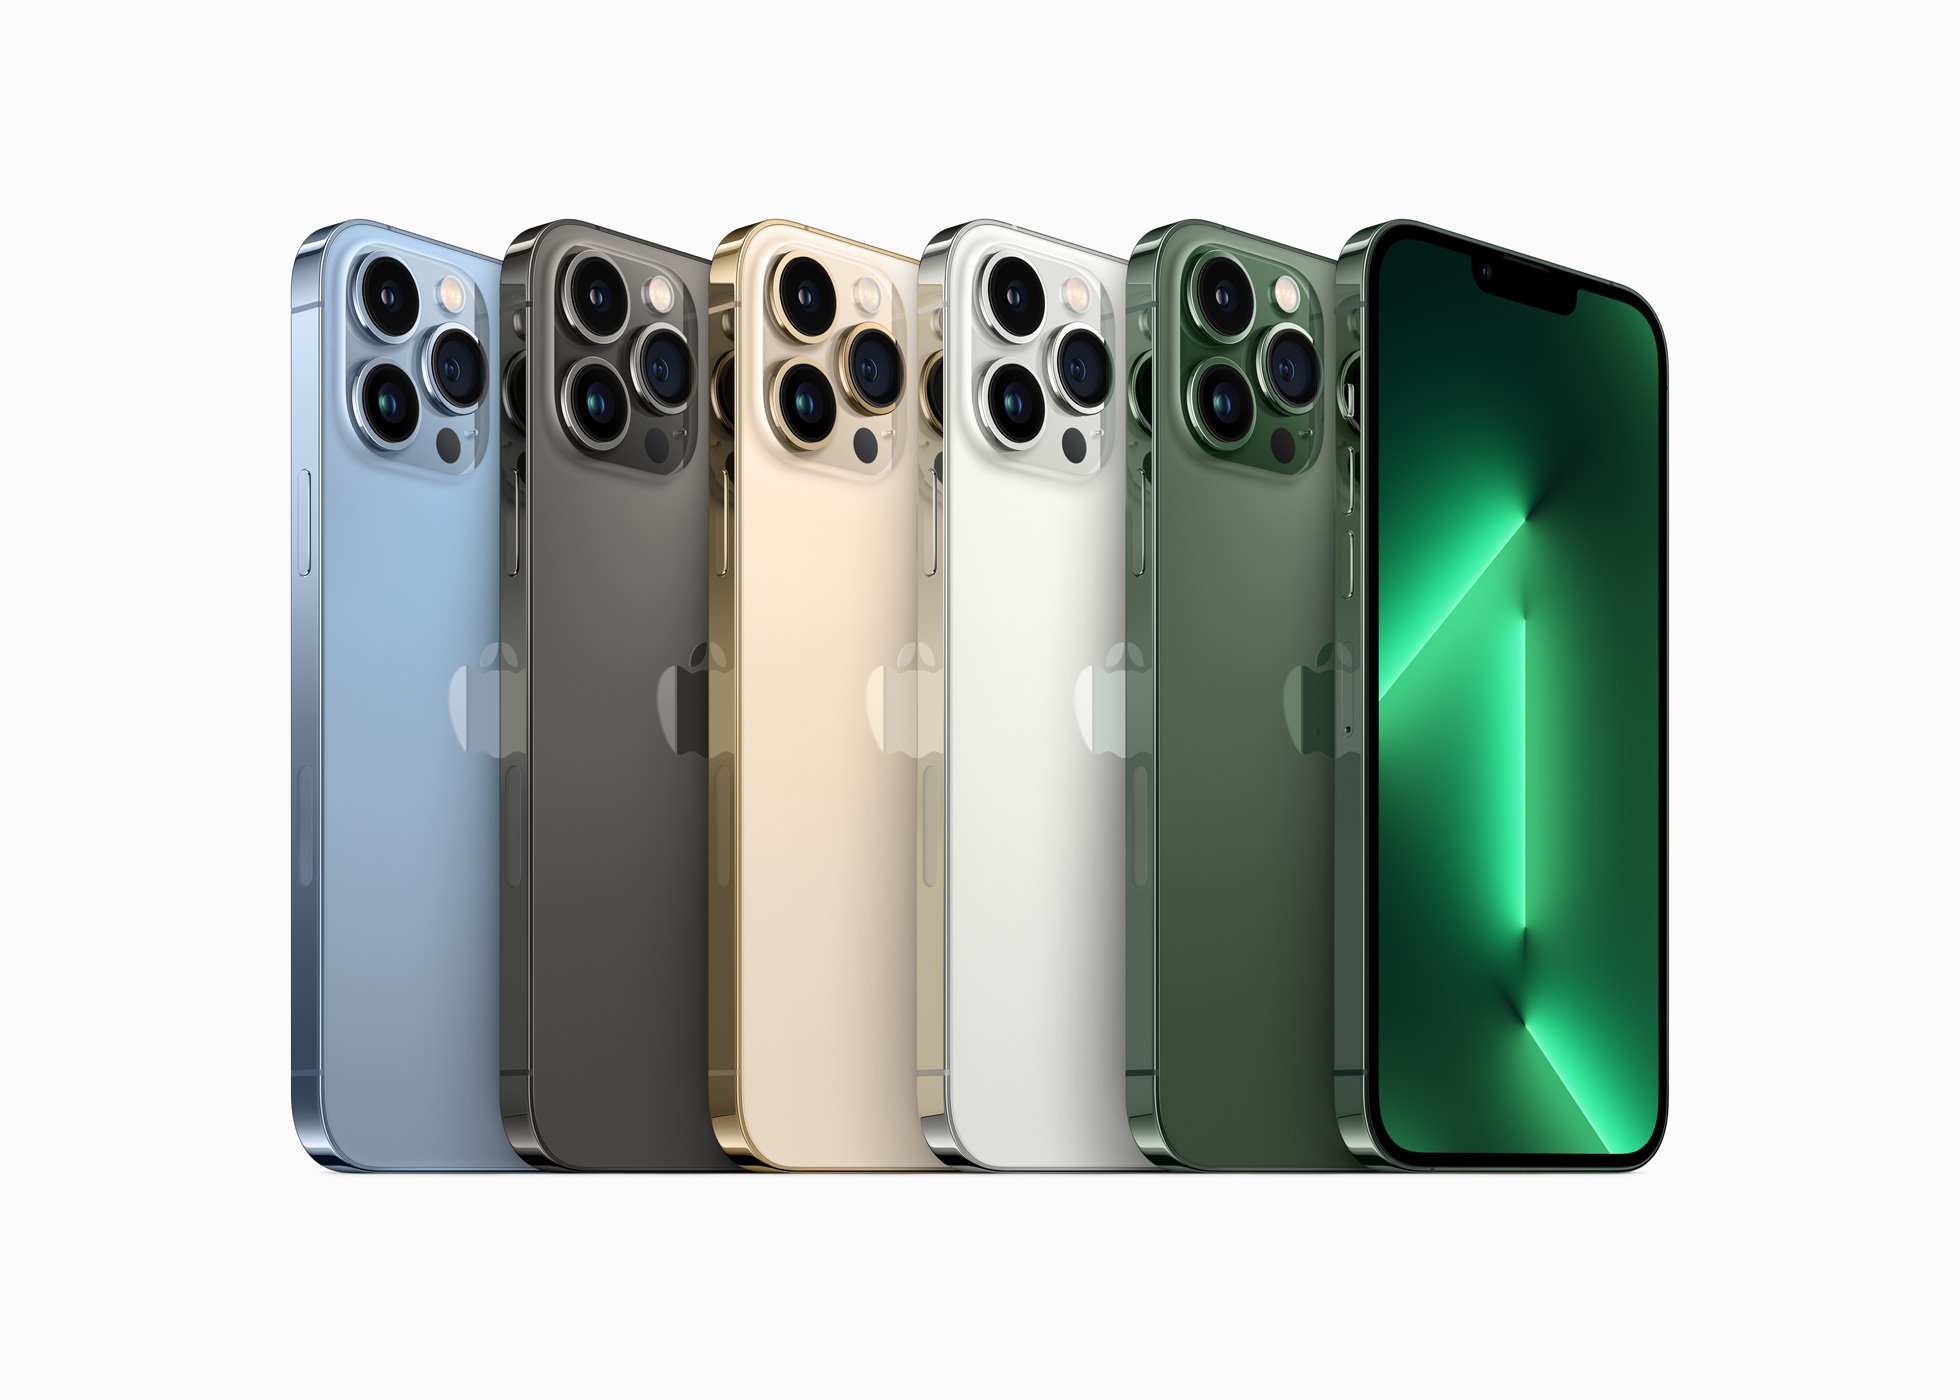 iPhone 13 Pro colors: Which should you buy? | iMore